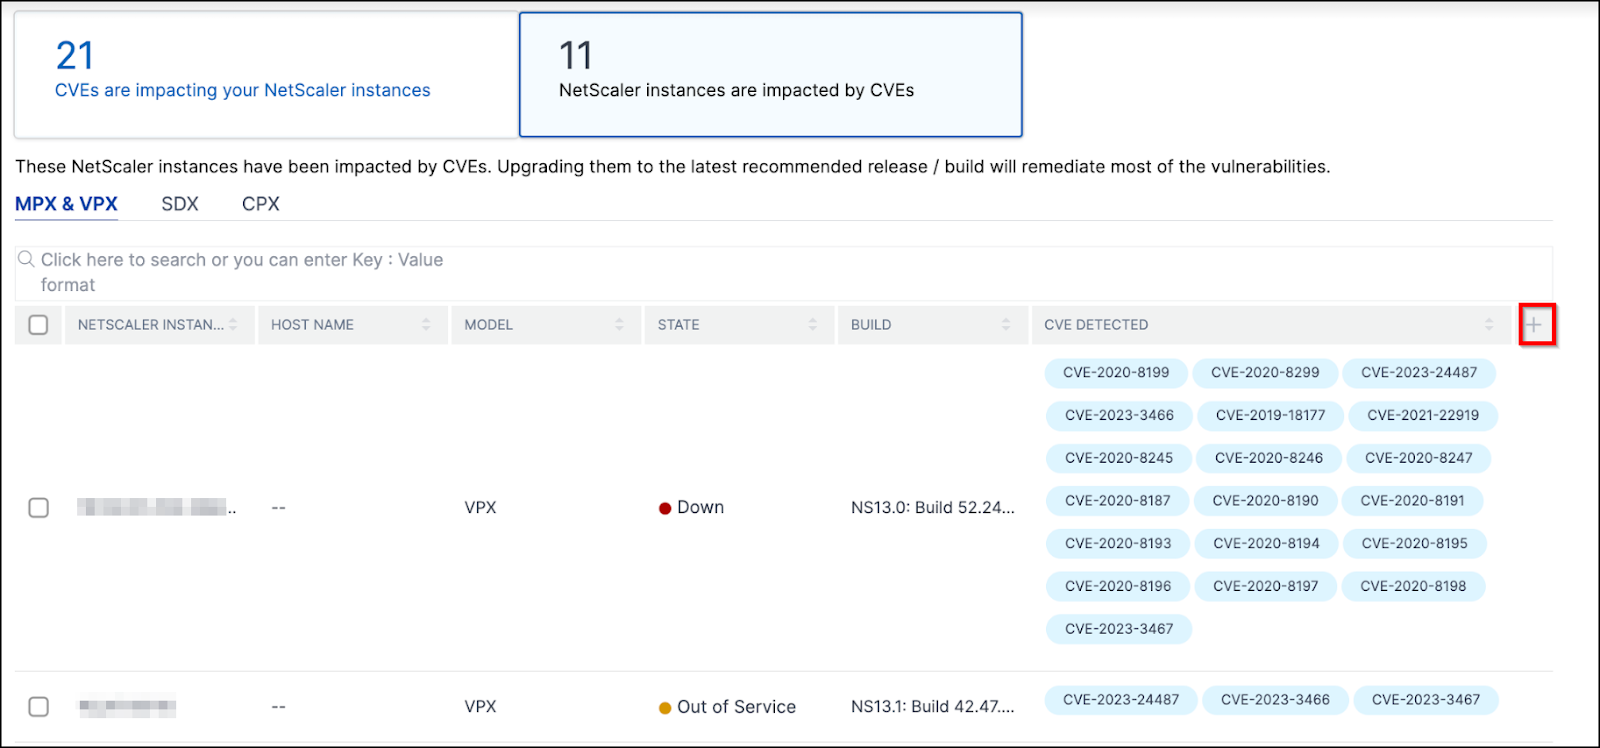 How to (proactively) manage Citrix NetScaler vulnerabilities